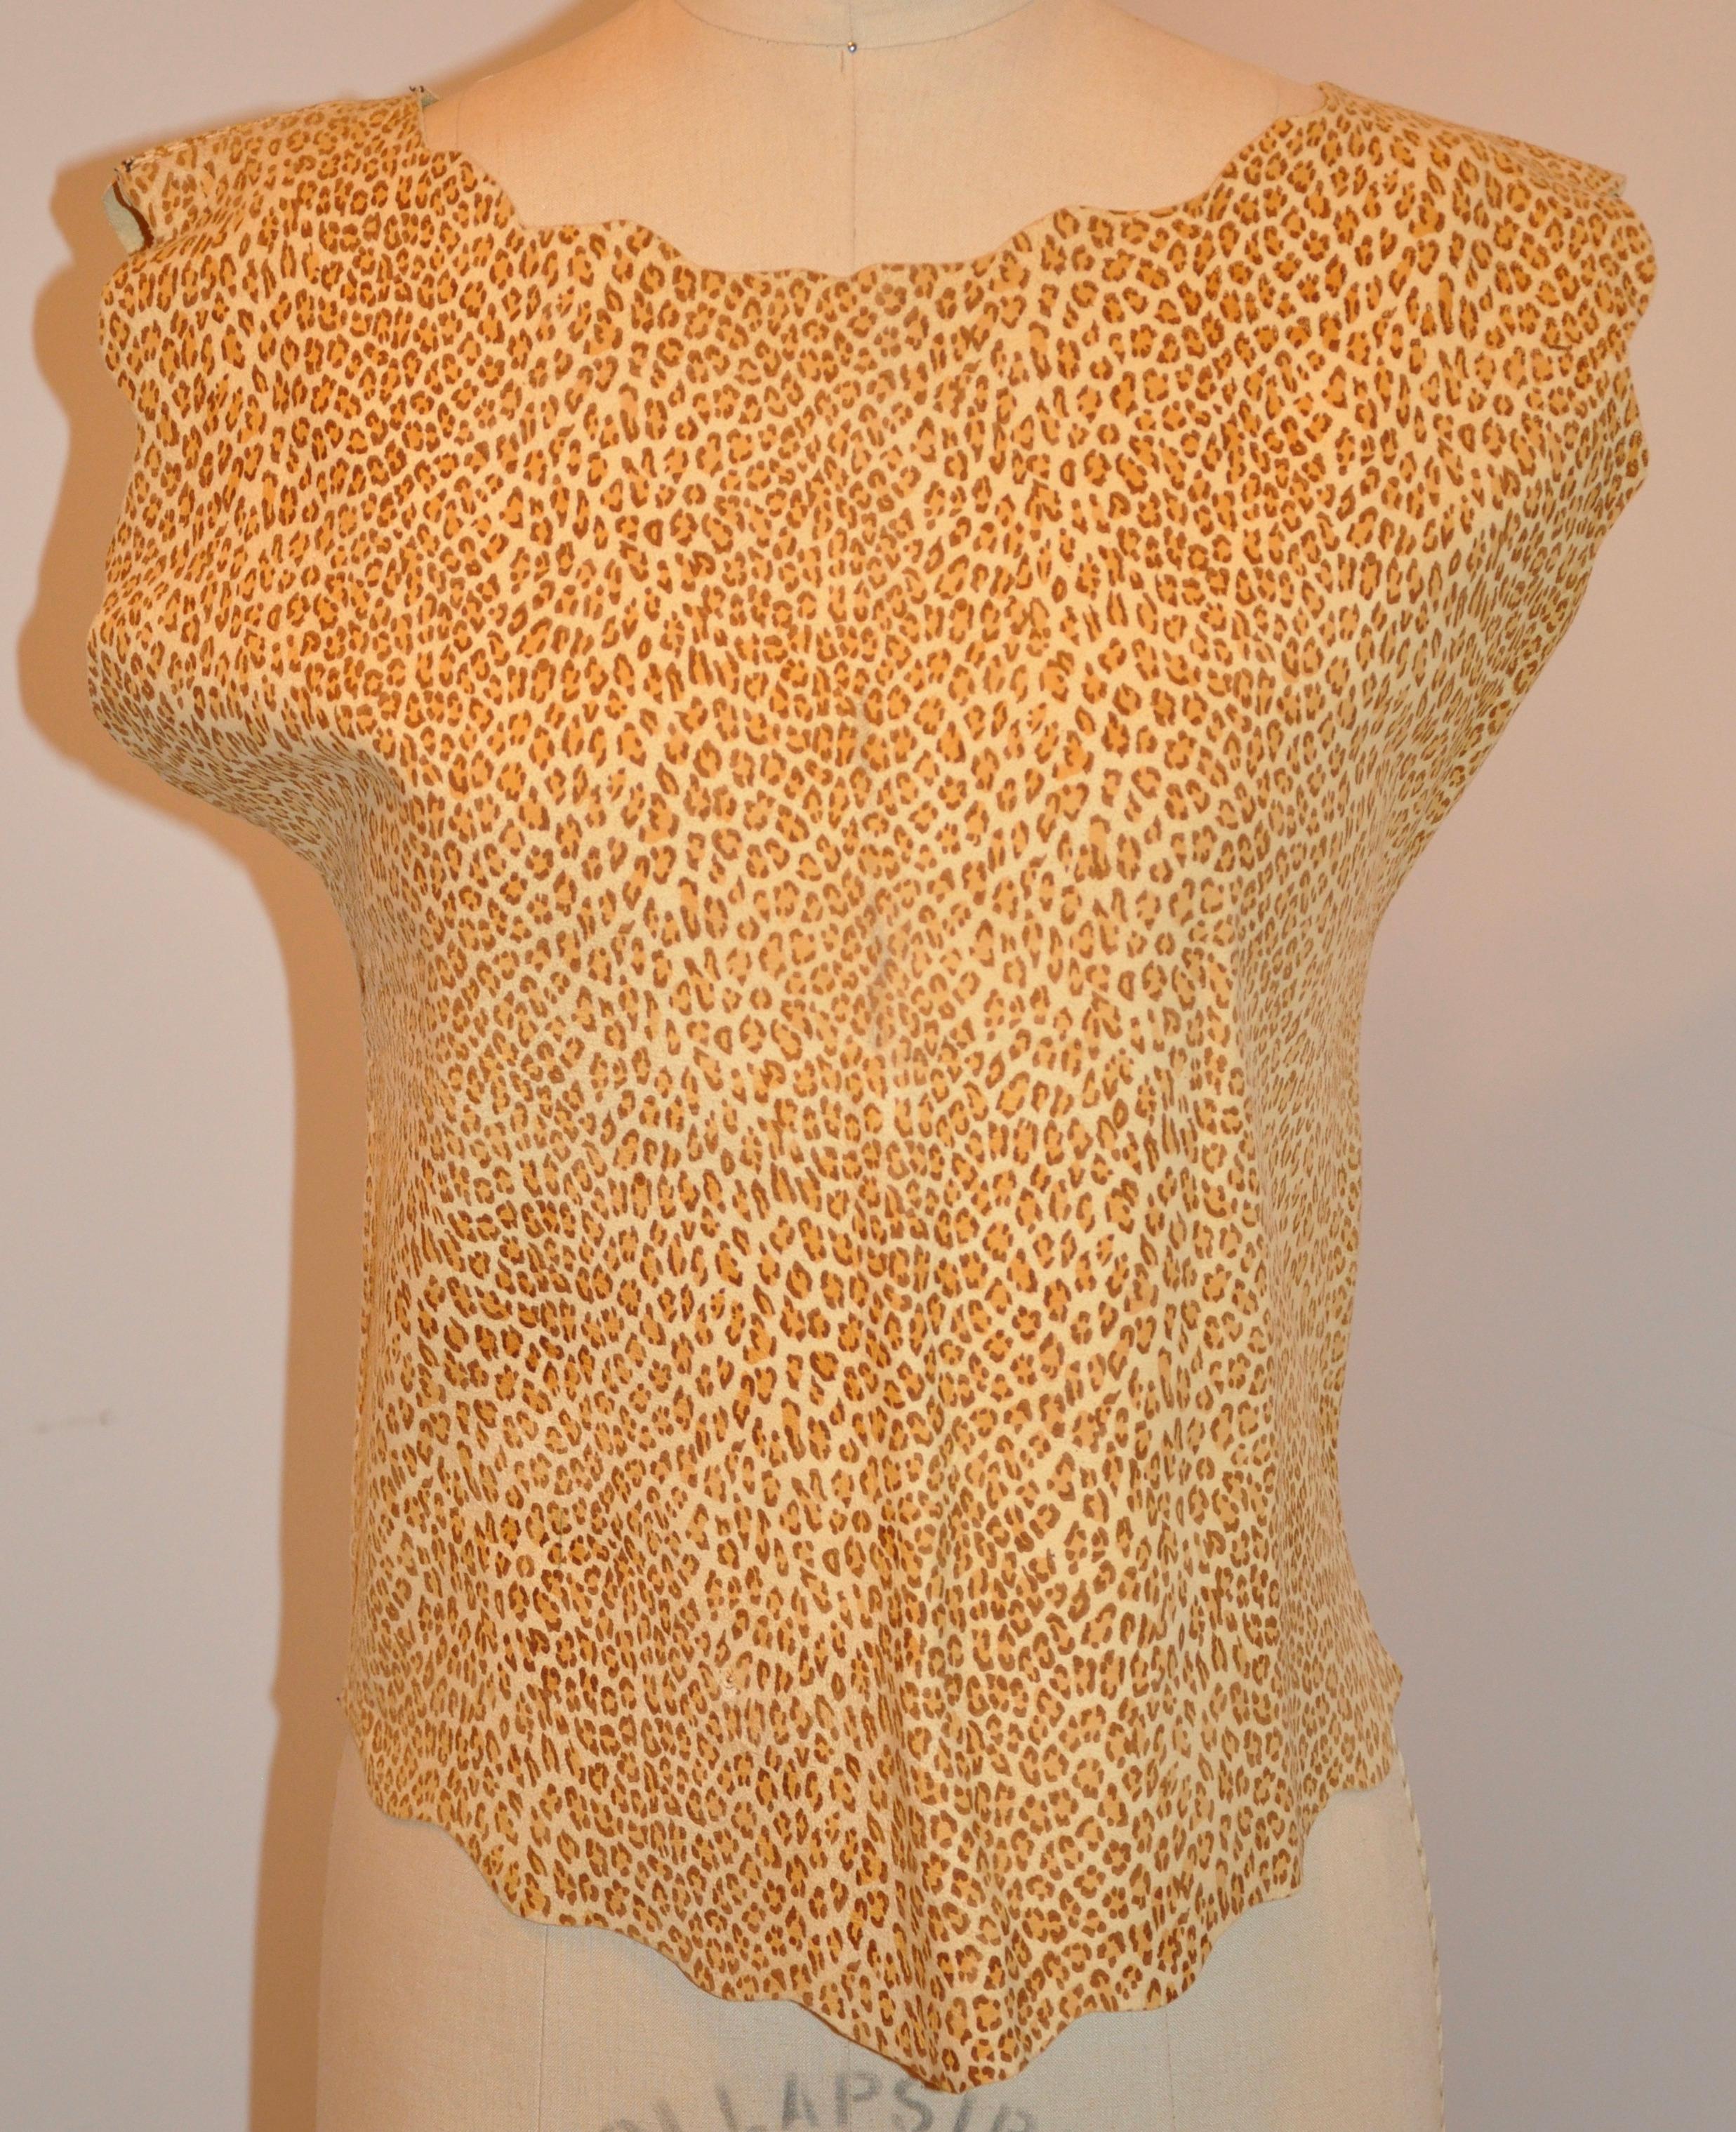     This wonderfully soft plush chamois leather leopard-print finished with scallop edges pullover measures 22 inches in length. The shoulders across measures 16 1/2 inches, underarm circumference is 18 1/4 inches, waist is 34 inches, hem